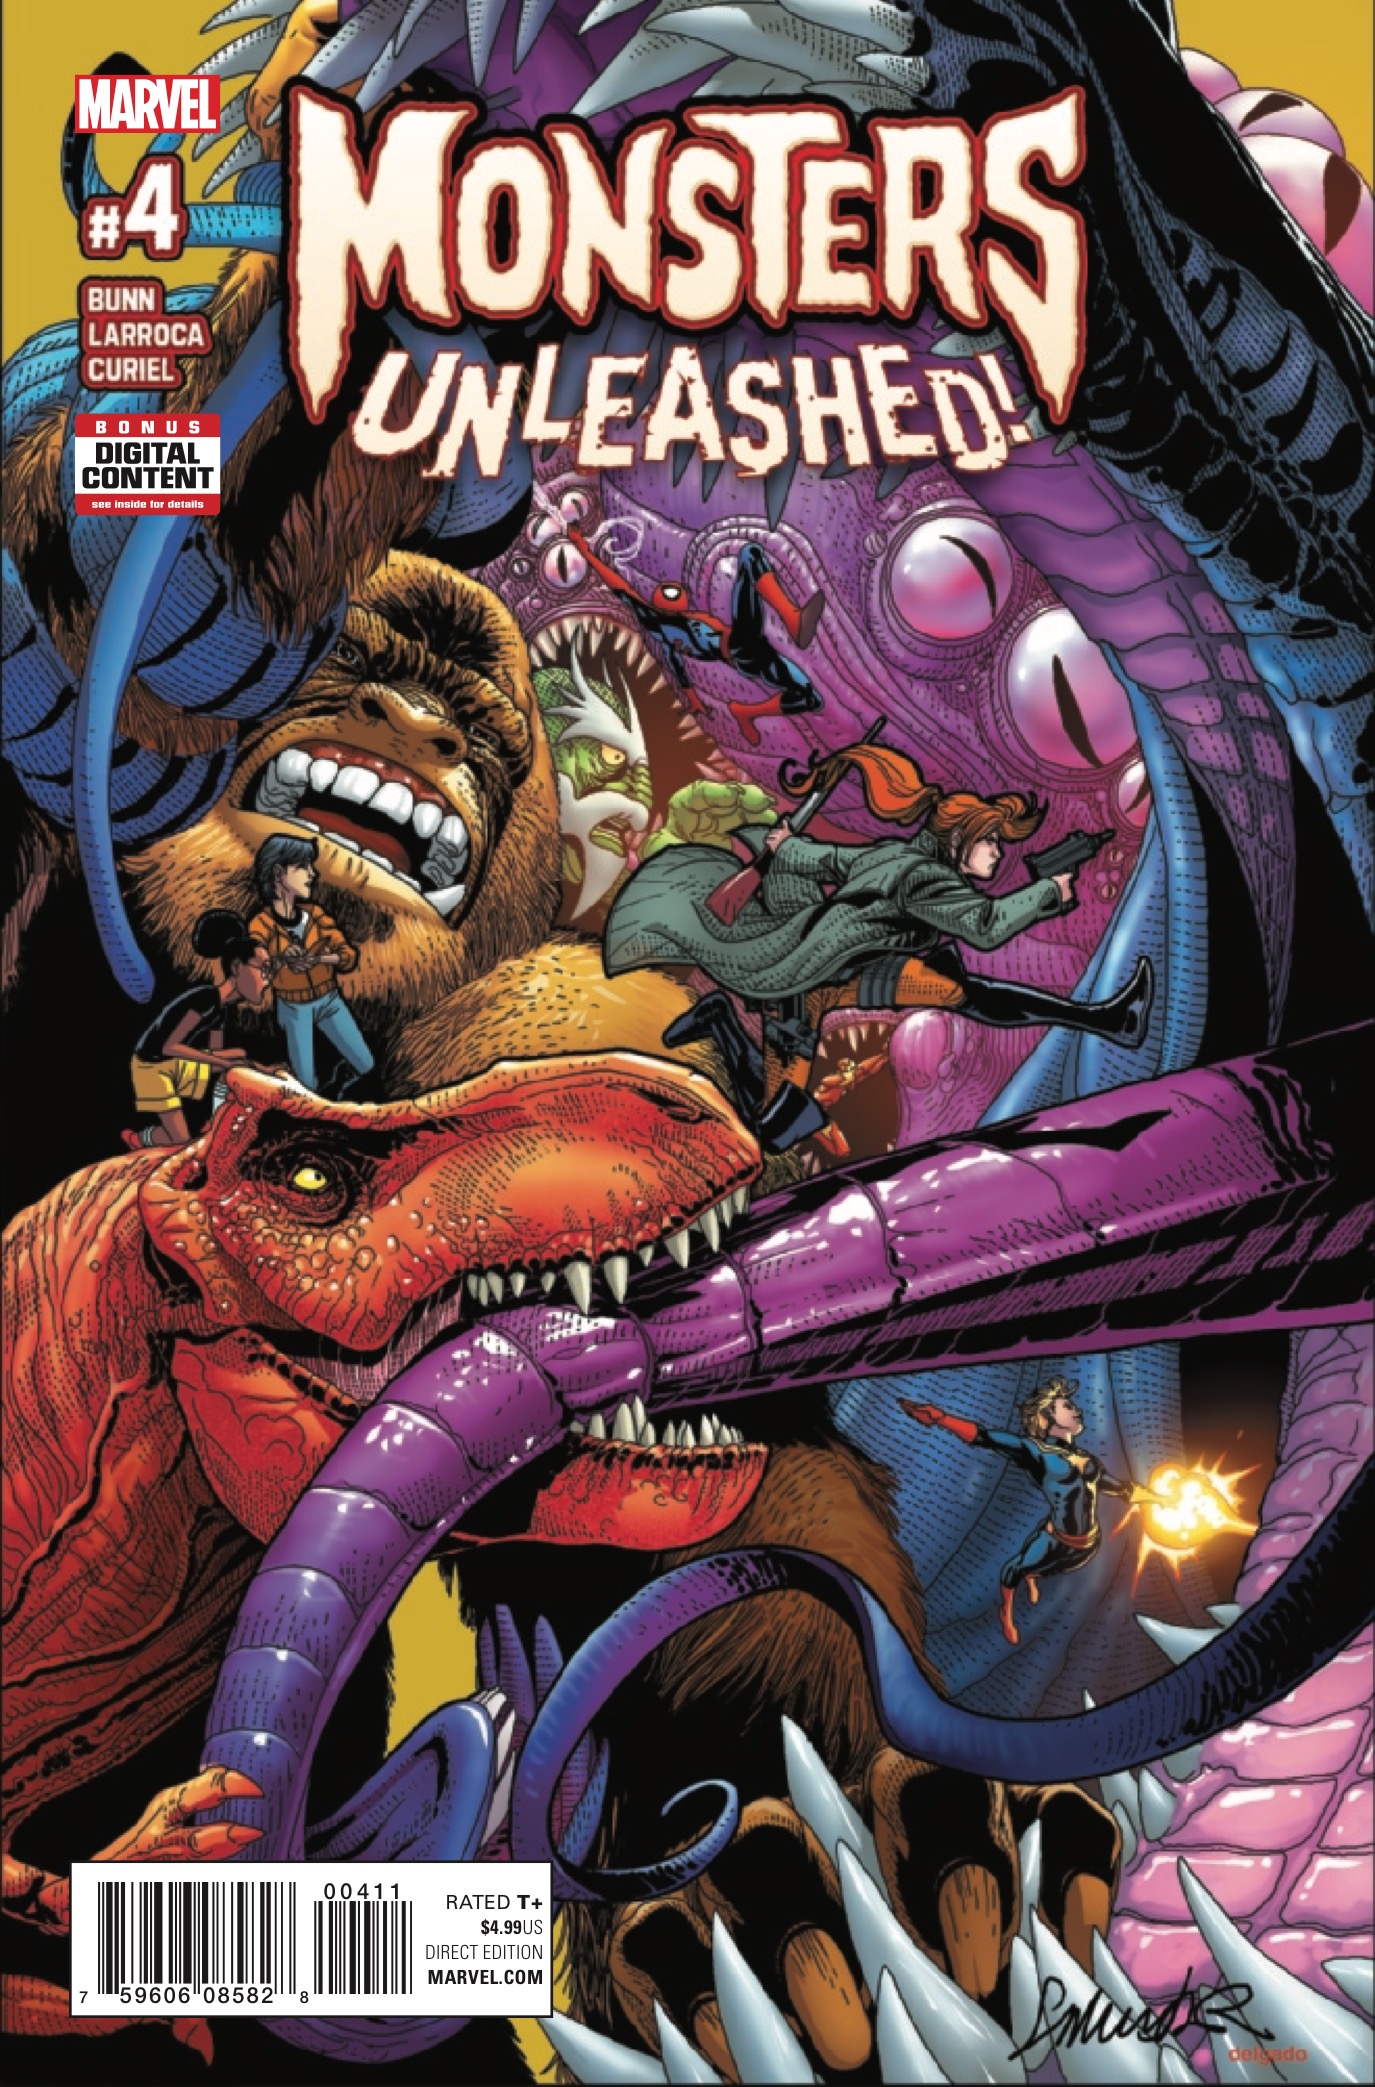 Monsters Unleashed #4 Review